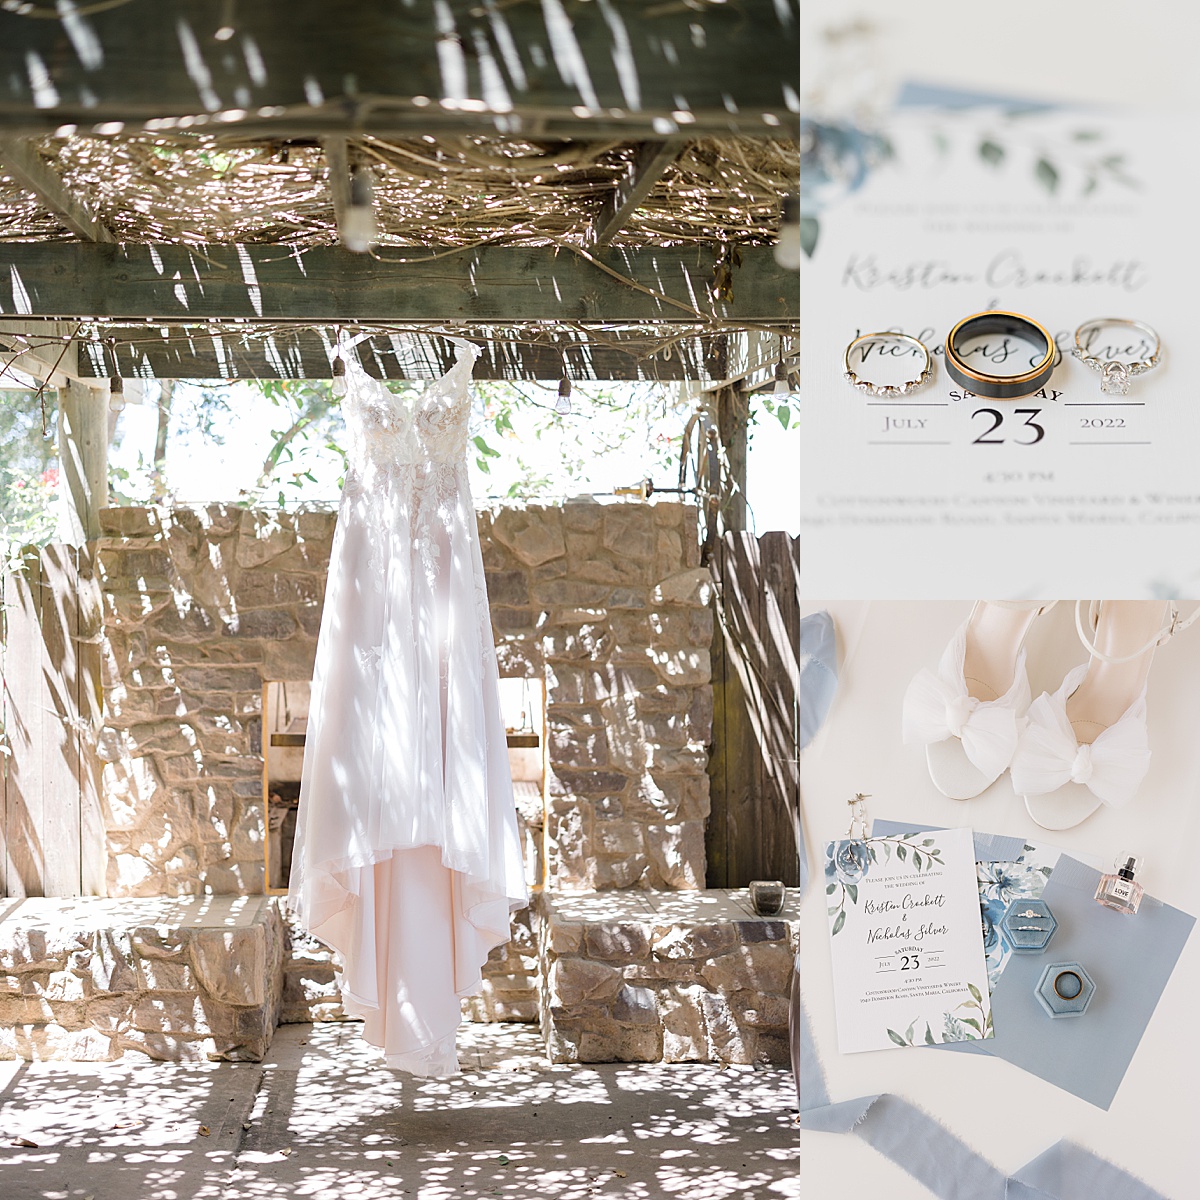 details of invitation, bride and groom rings, and romantic gown from California vineyard wedding